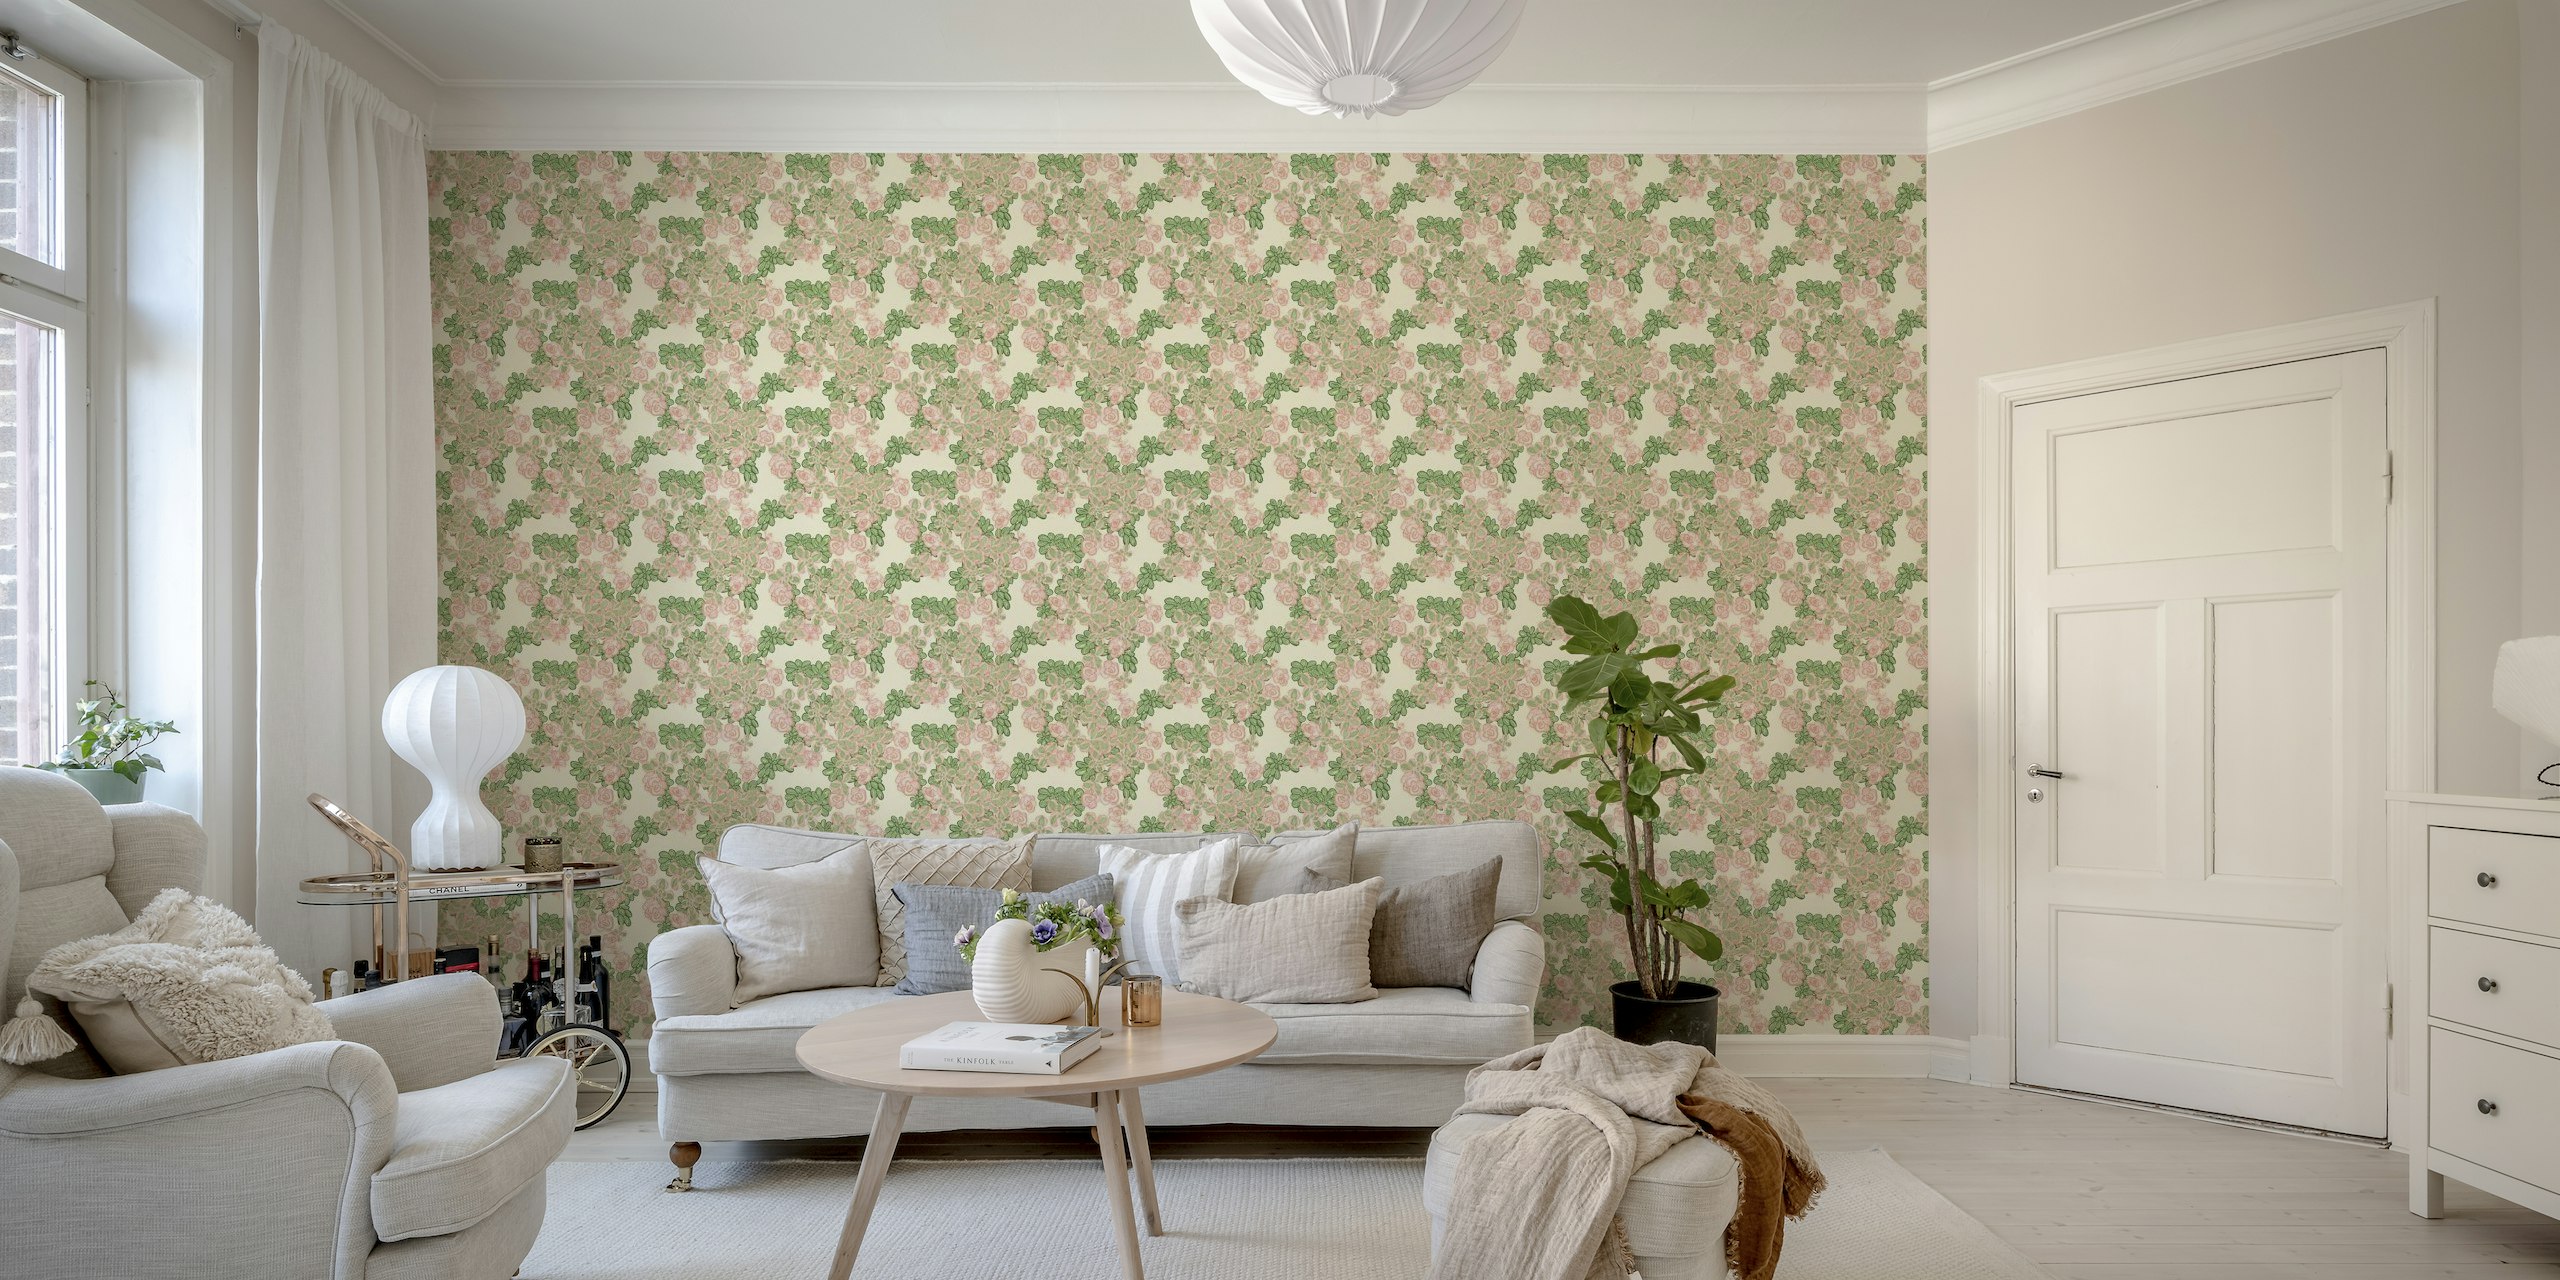 Vintage-style Sedum Floral wall mural in antique white with soft green and pink accents.